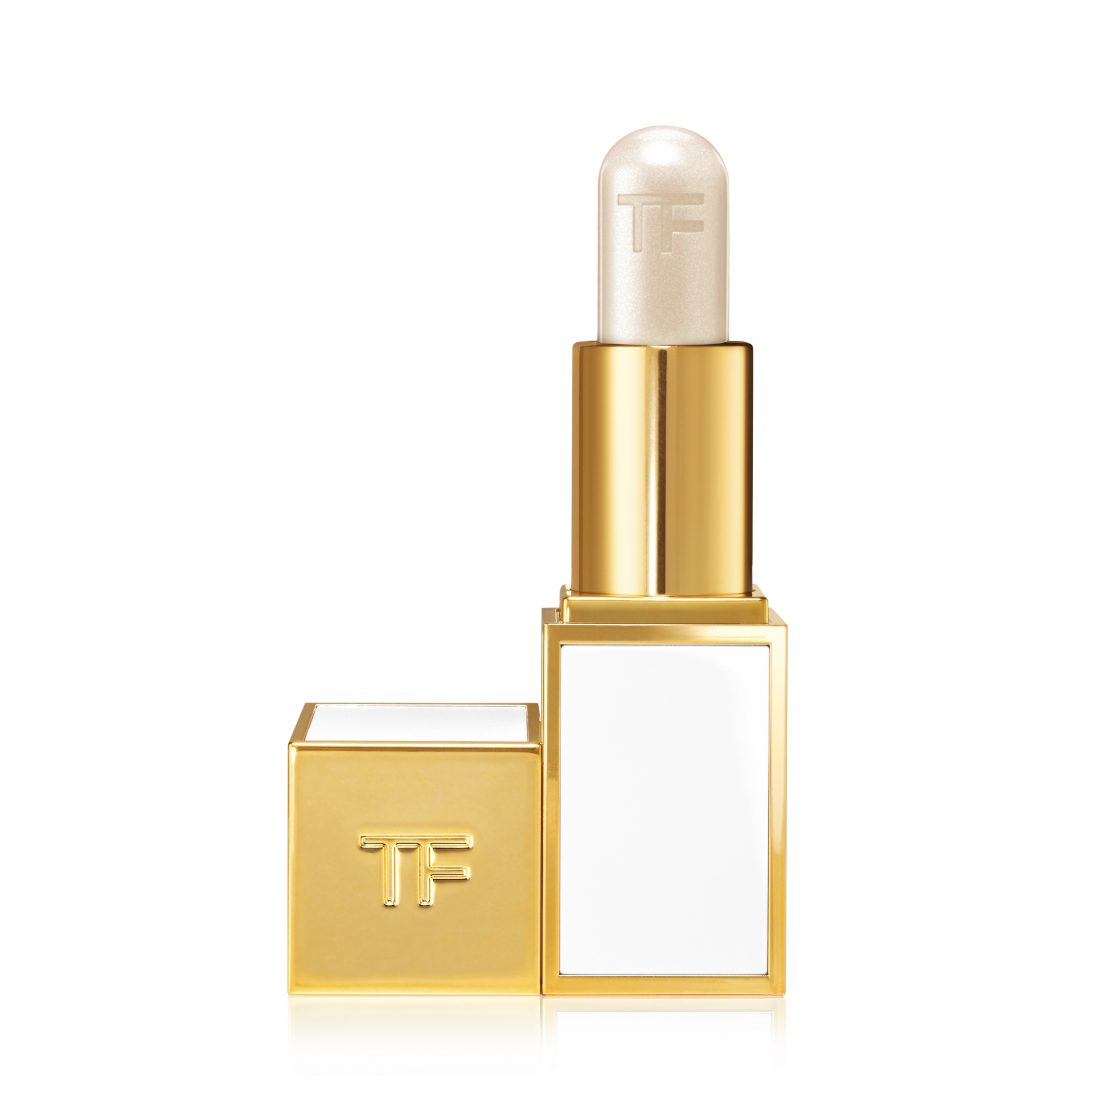 Tom Ford Beauty Releases New 